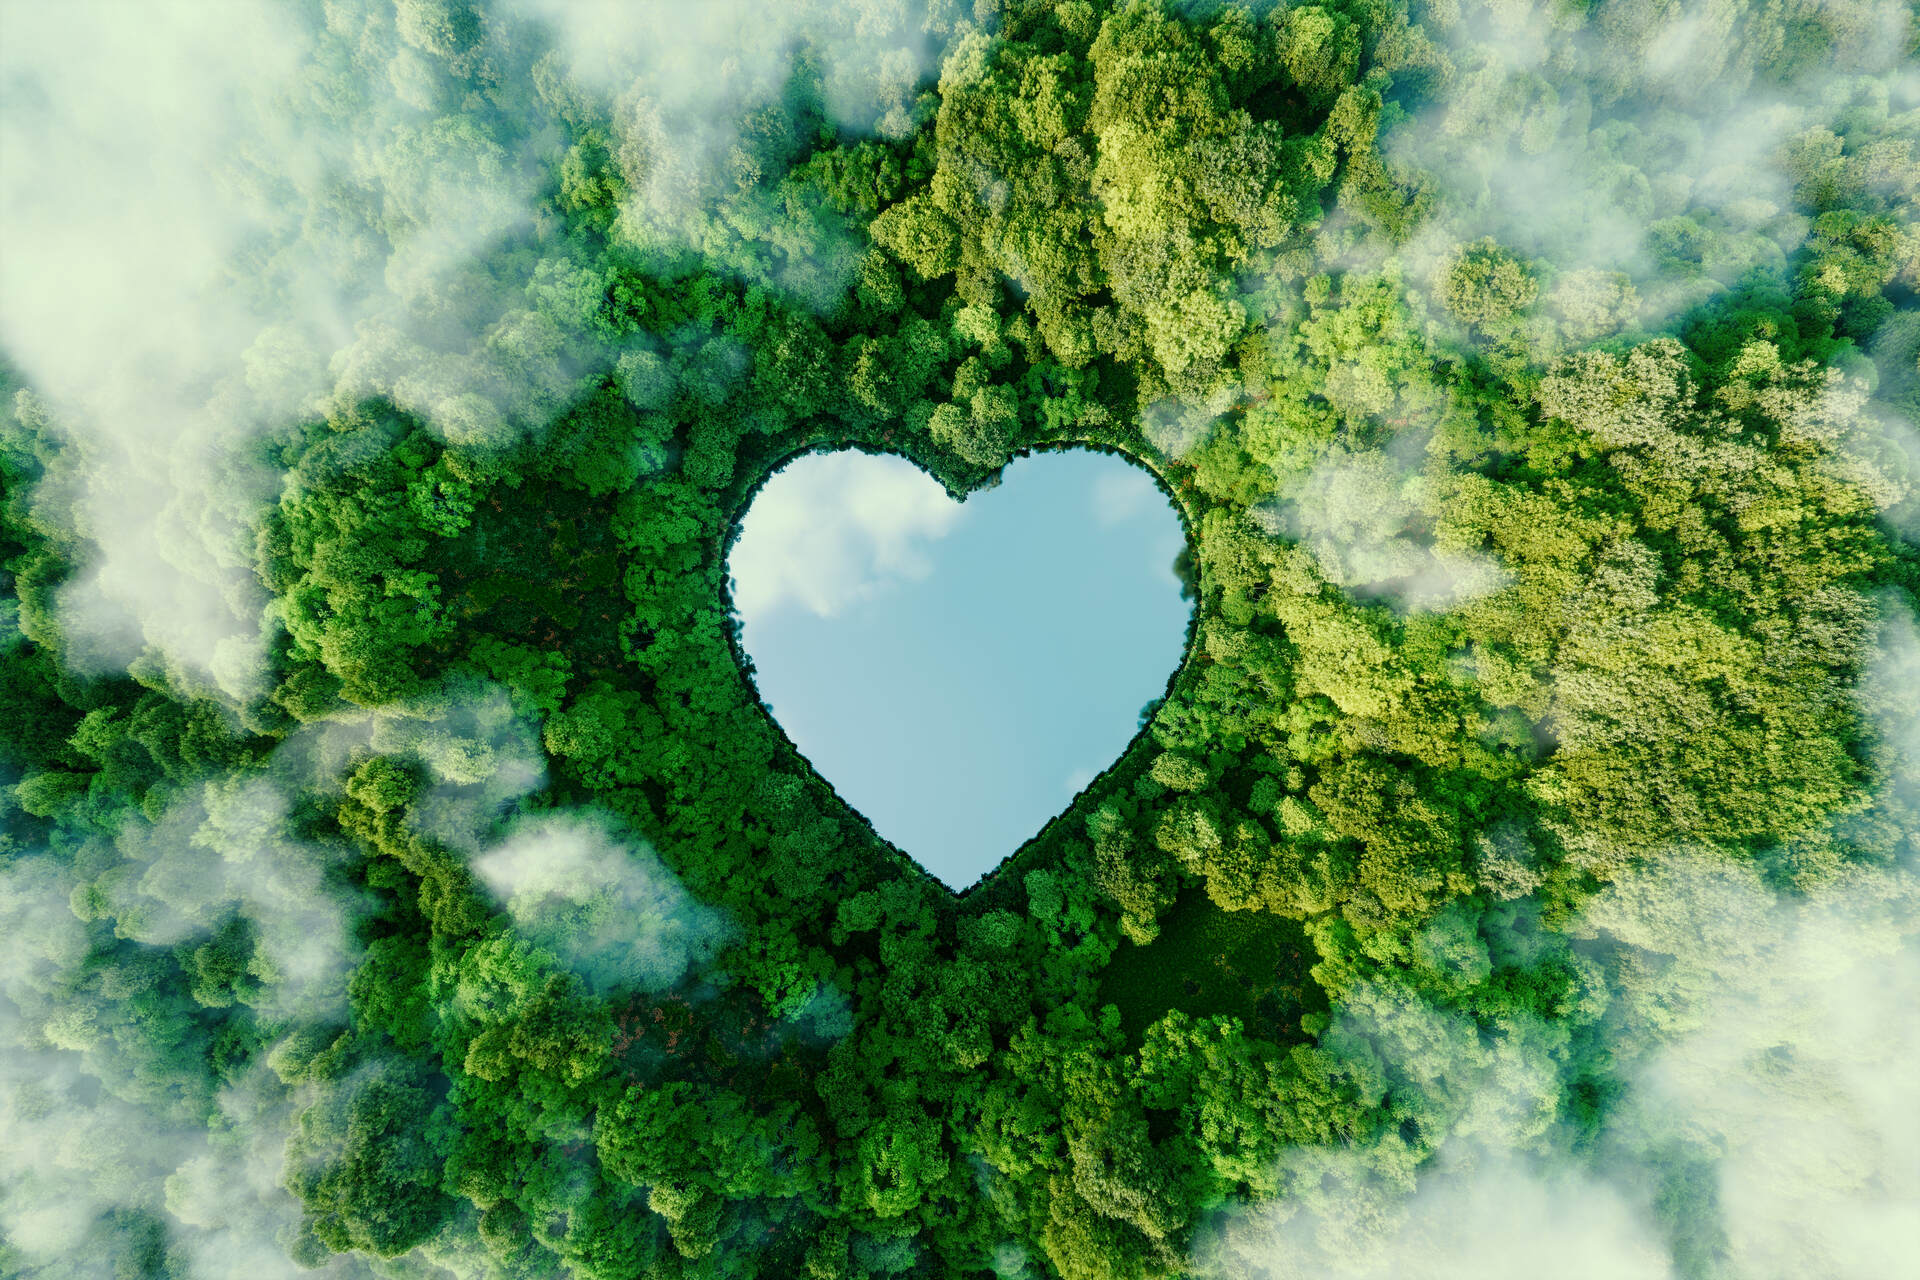 A cloudy rainforest with a heart shaped lake